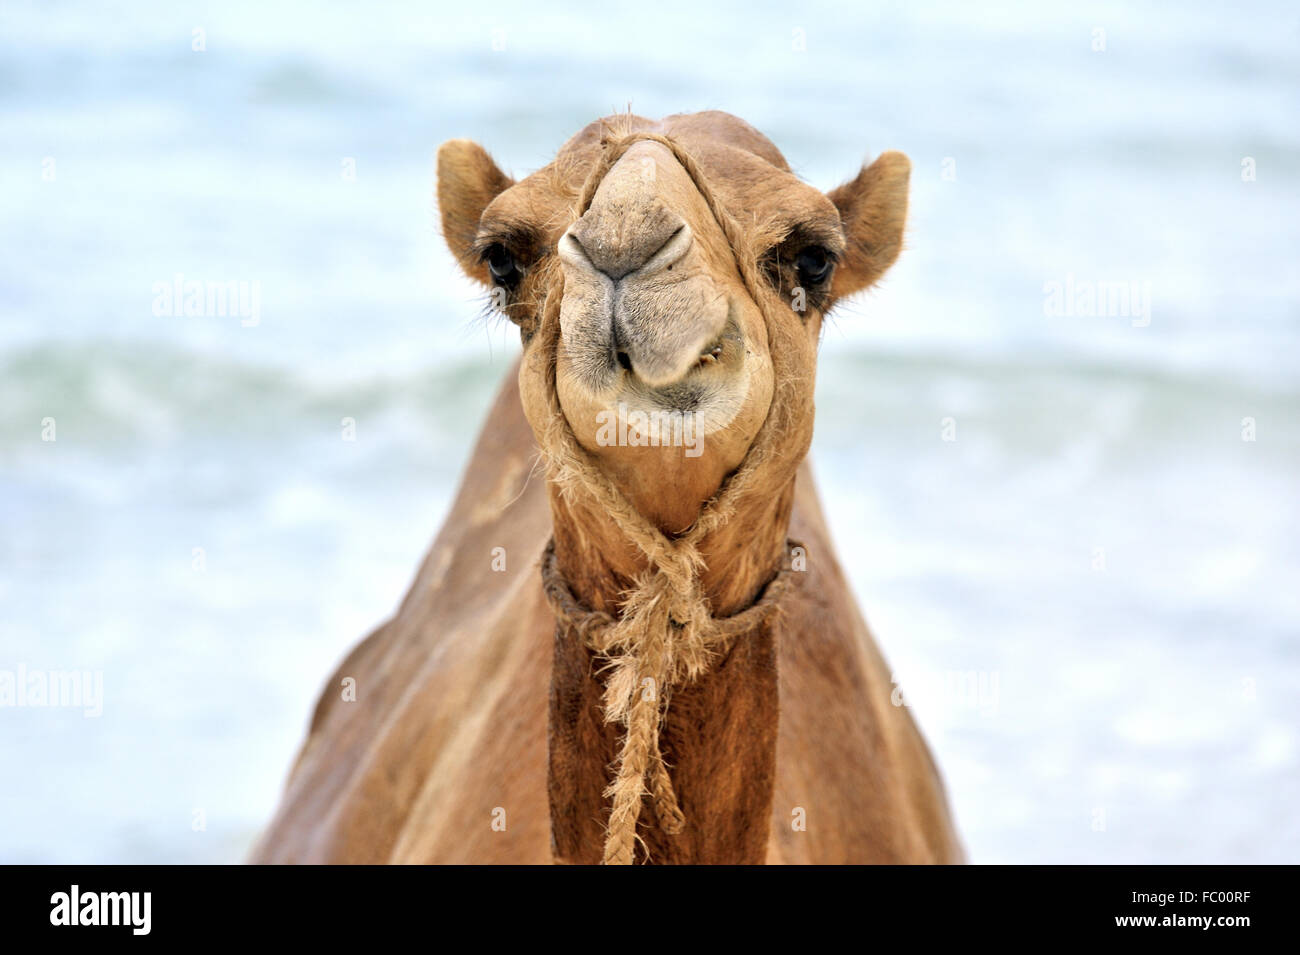 Funny Camel gritting its teeth Stock Photo